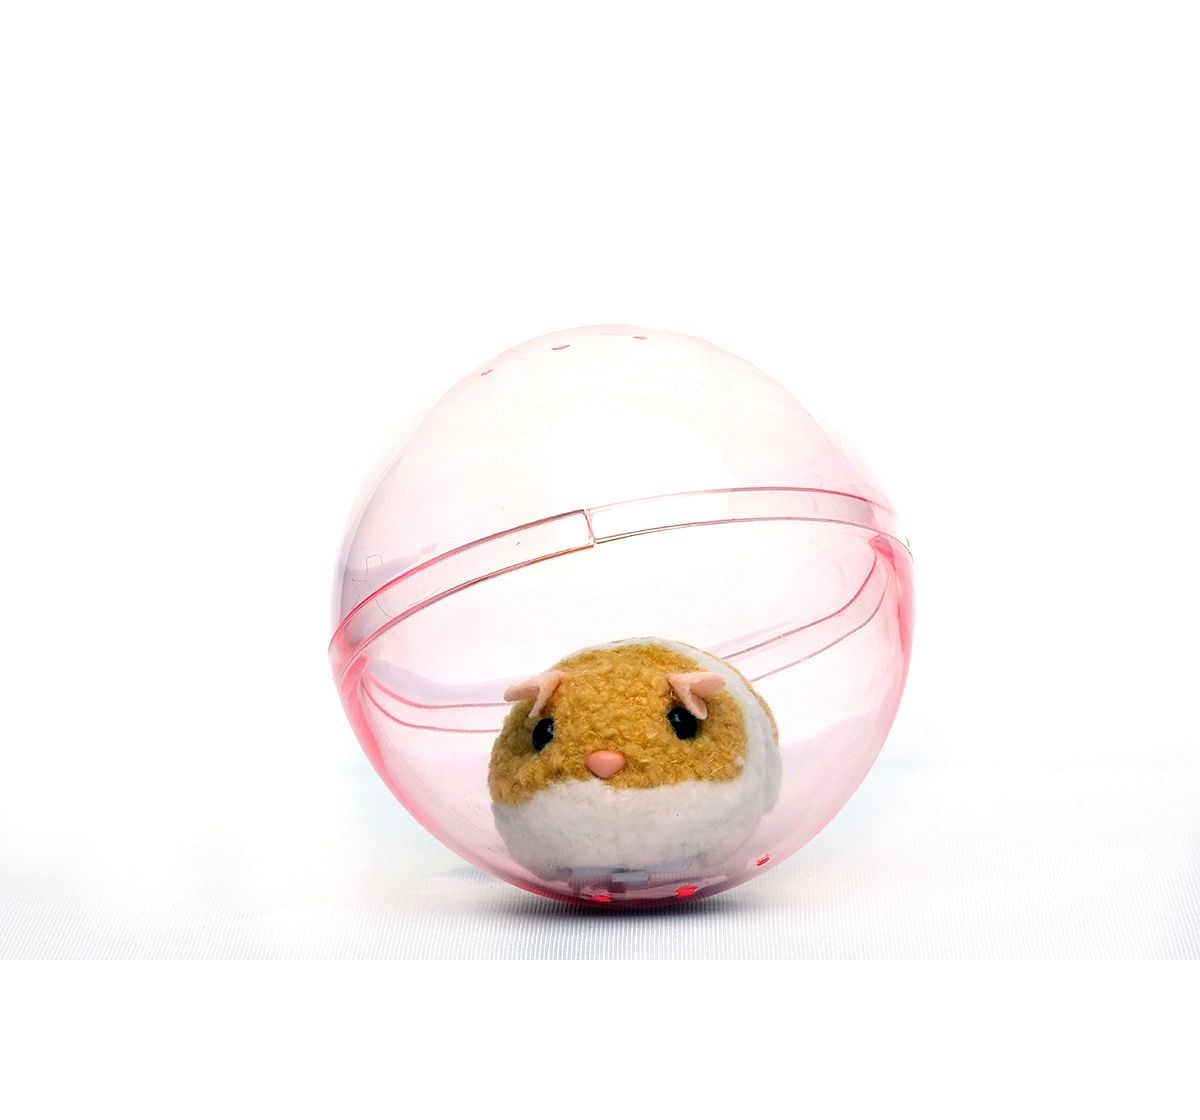 Hamleys Movers & Shakers - Rolling Hamster Interactive Soft Toys for Kids age 3Y+ - 10 Cm 